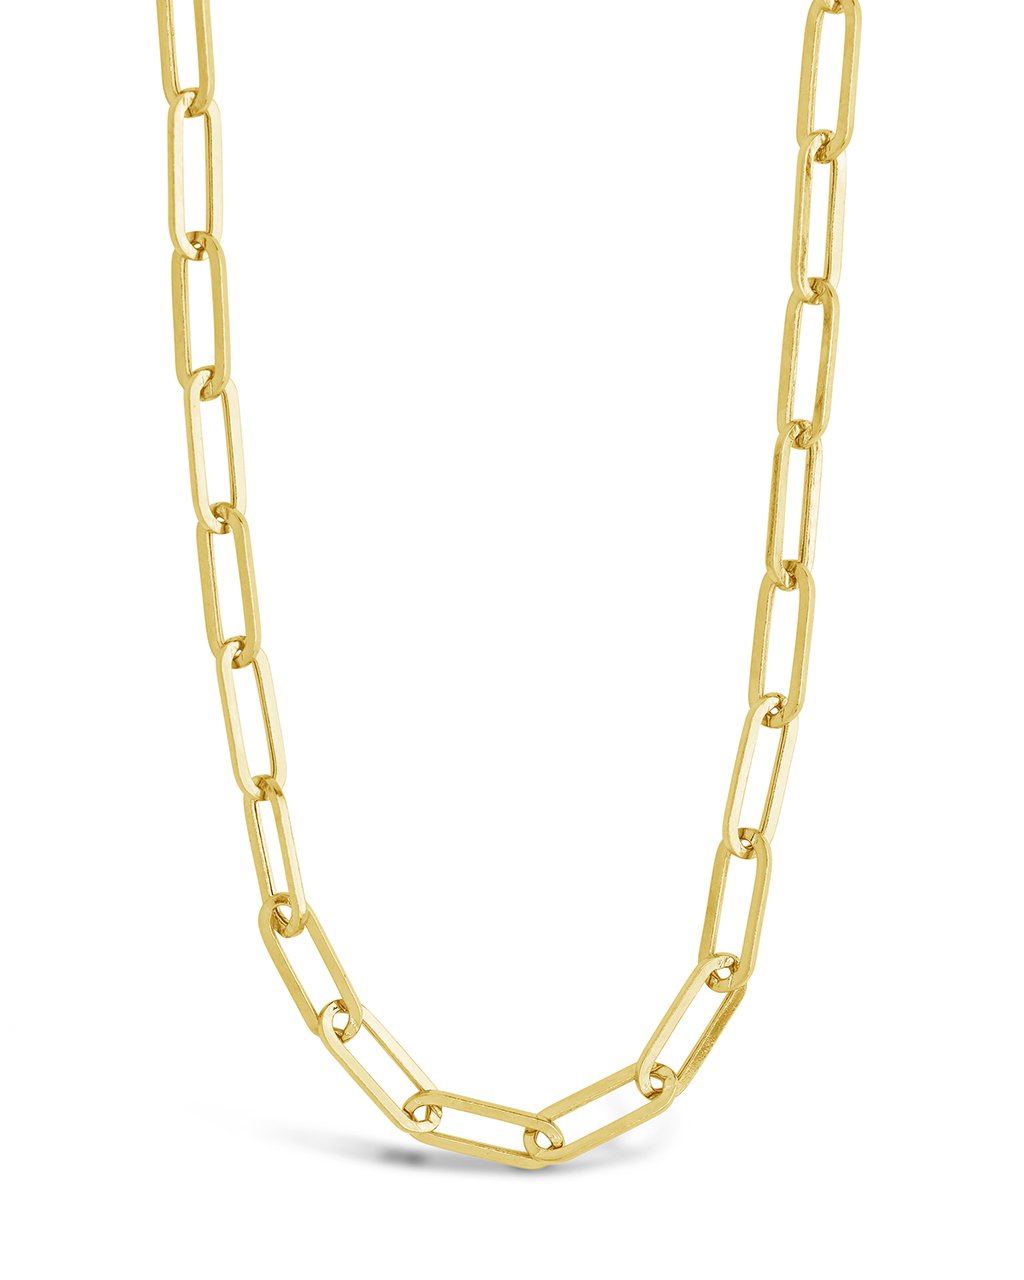 14K Yellow Gold Paperclip Chain Necklace